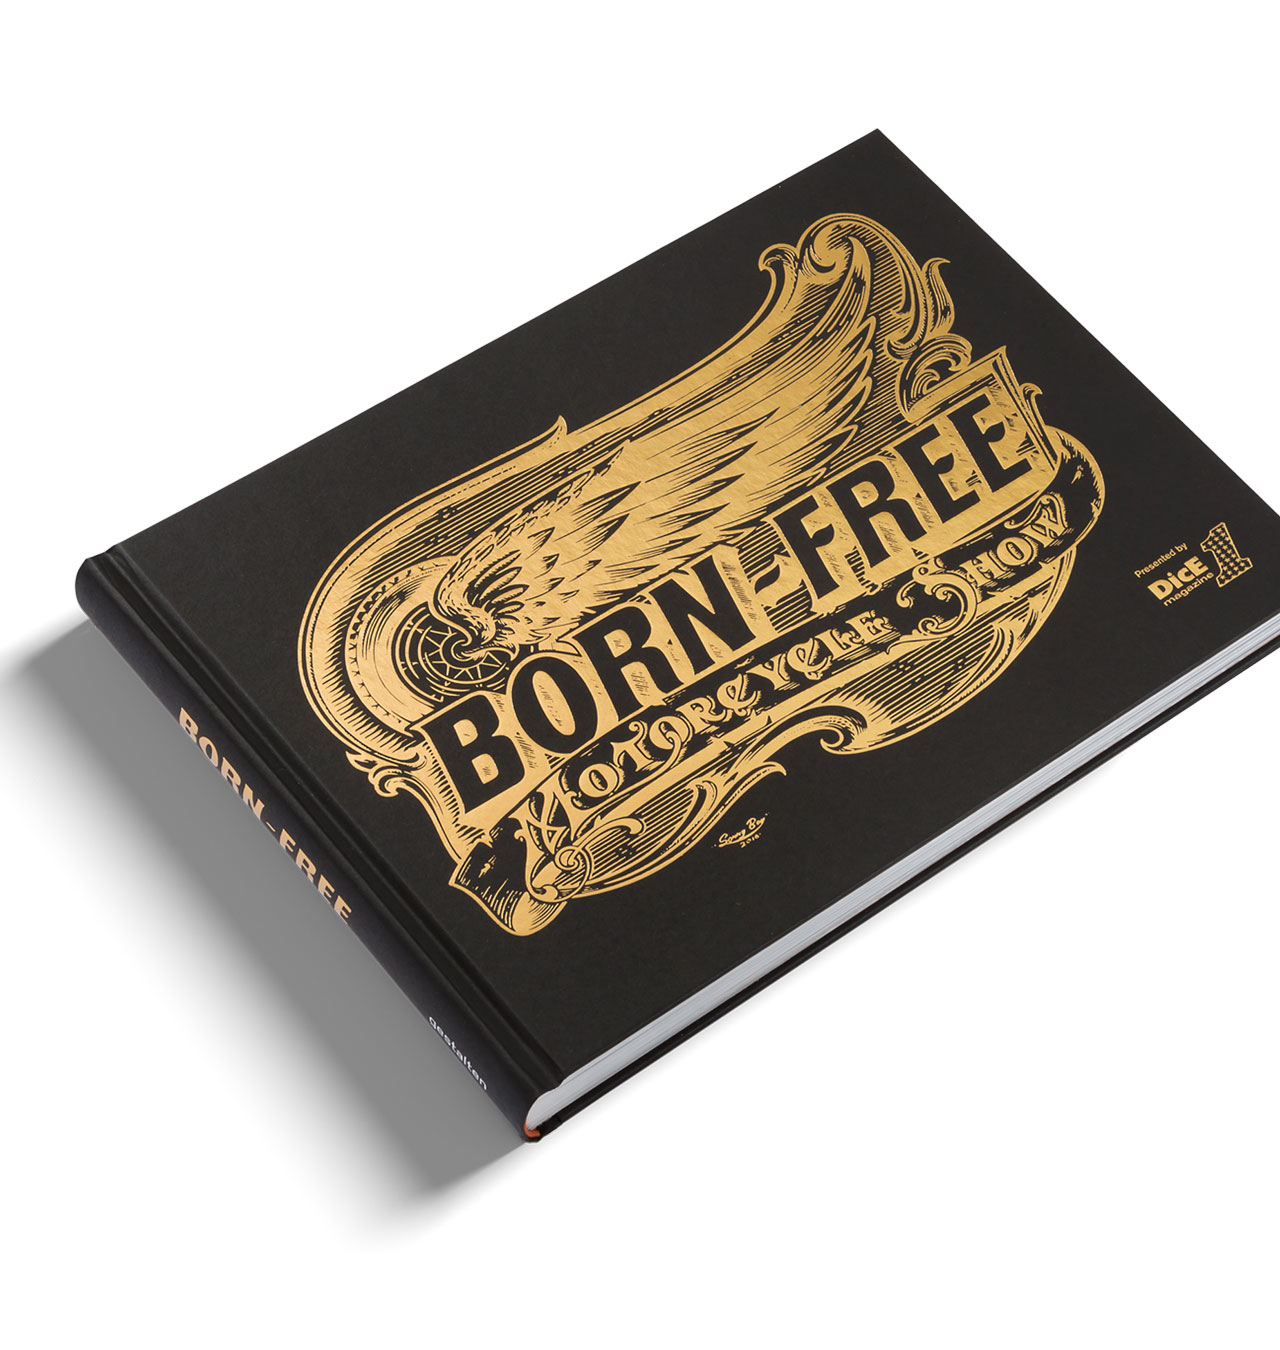 Born-Free Motorcycle Show - Book